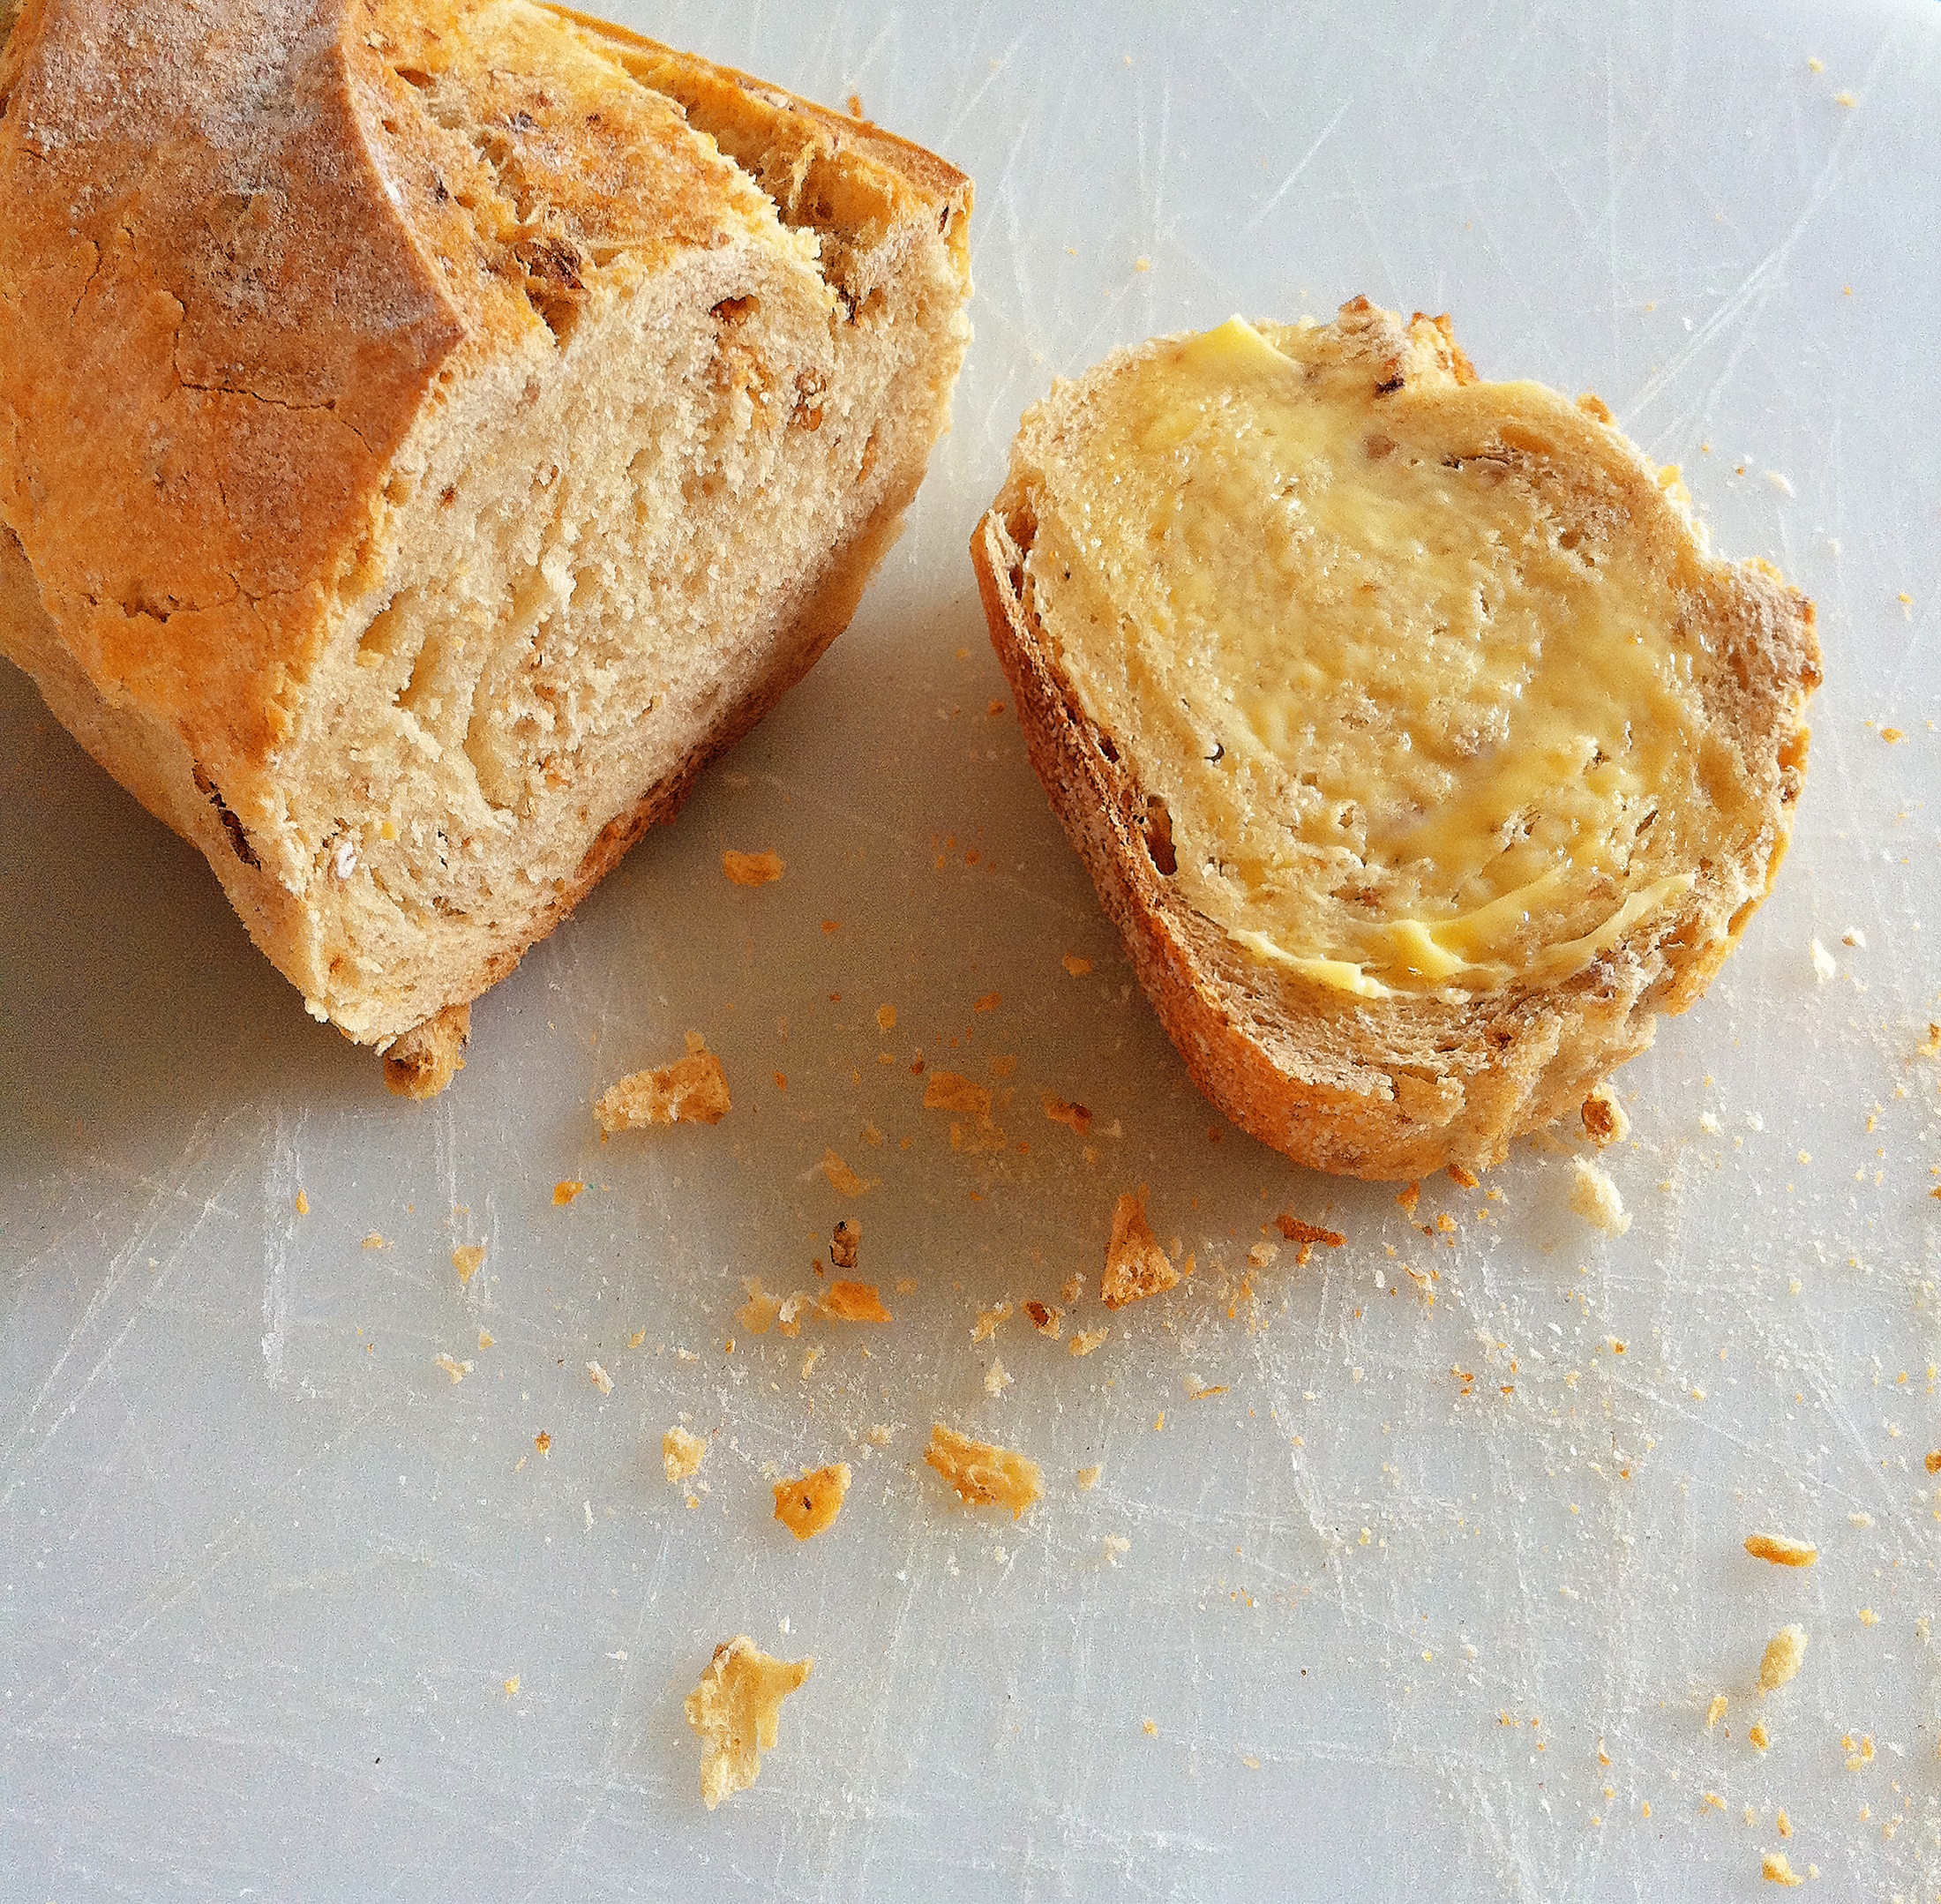 baked bread with yellow cream close-up photography